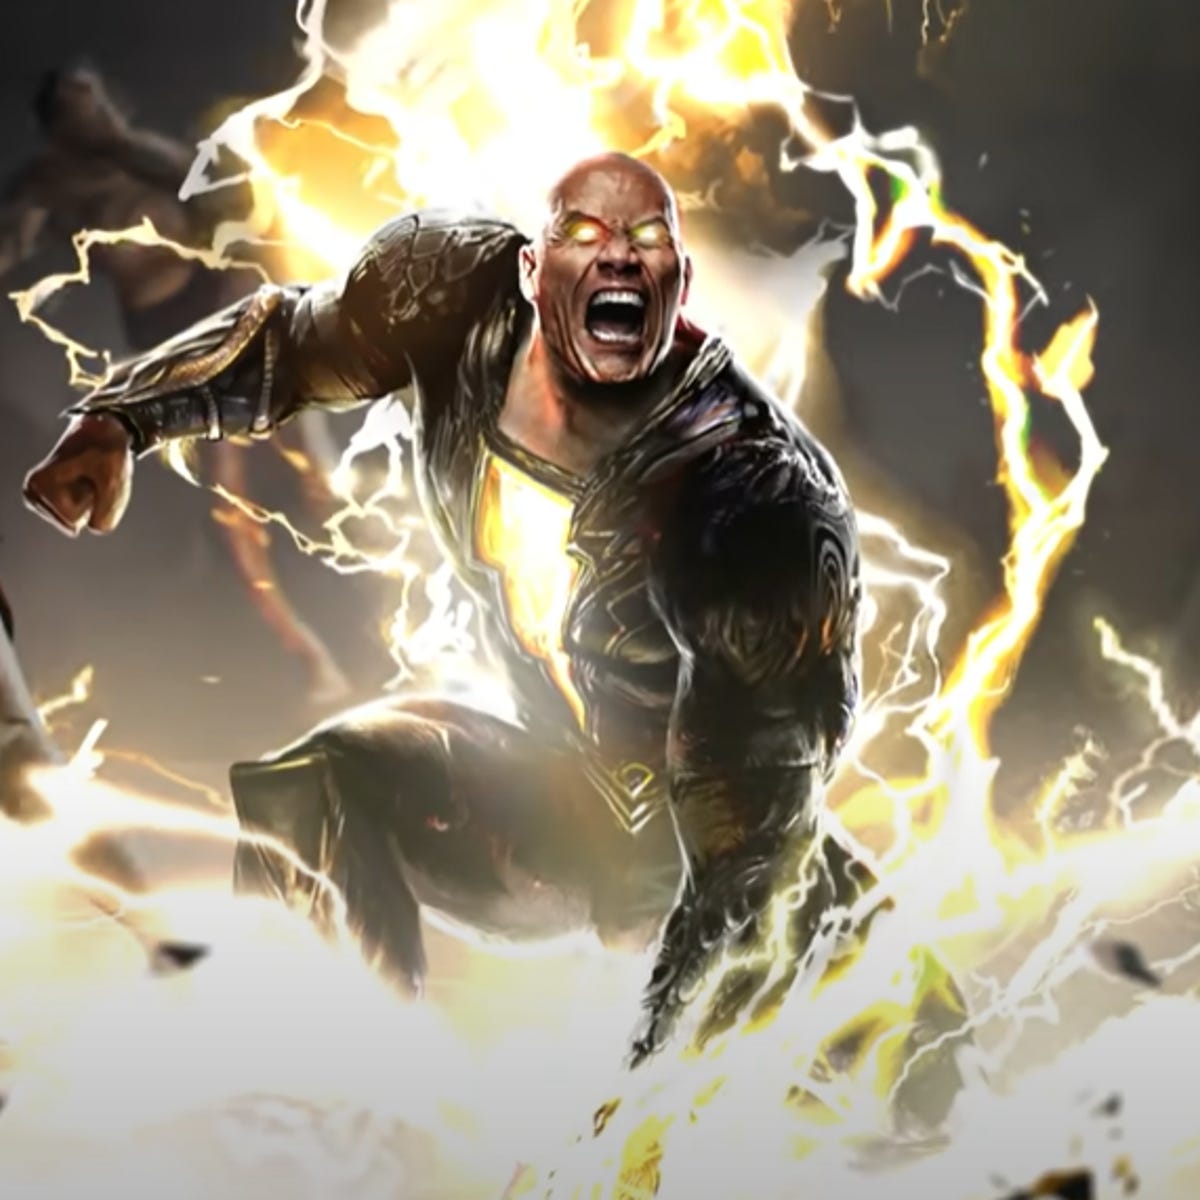 The Rock announces Black Adam's release date at Times Square